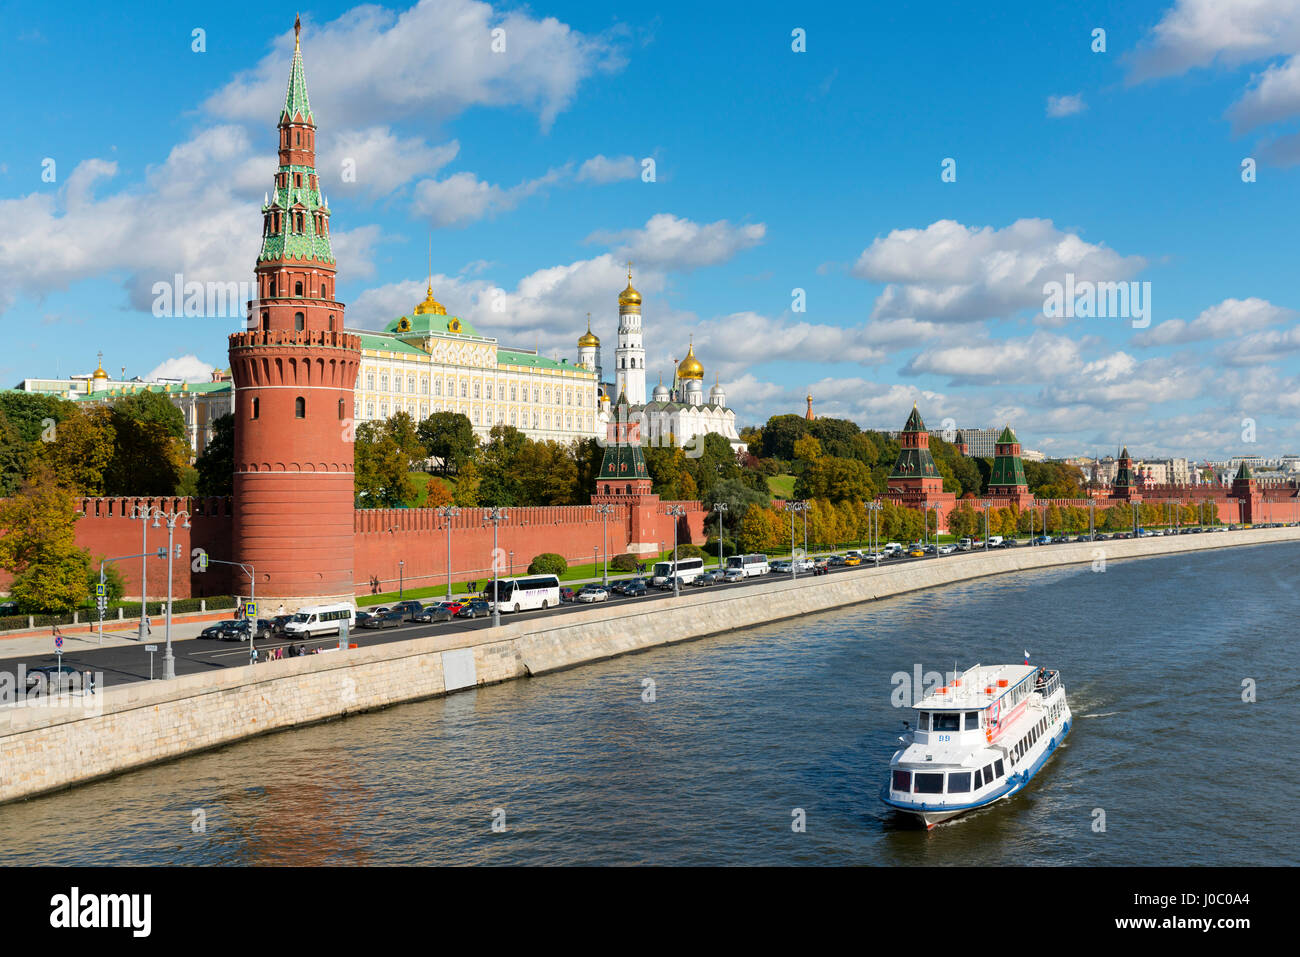 View of the Kremlin, UNESCO World Heritage Site, on the banks of the Moscow River, Moscow, Russia Stock Photo